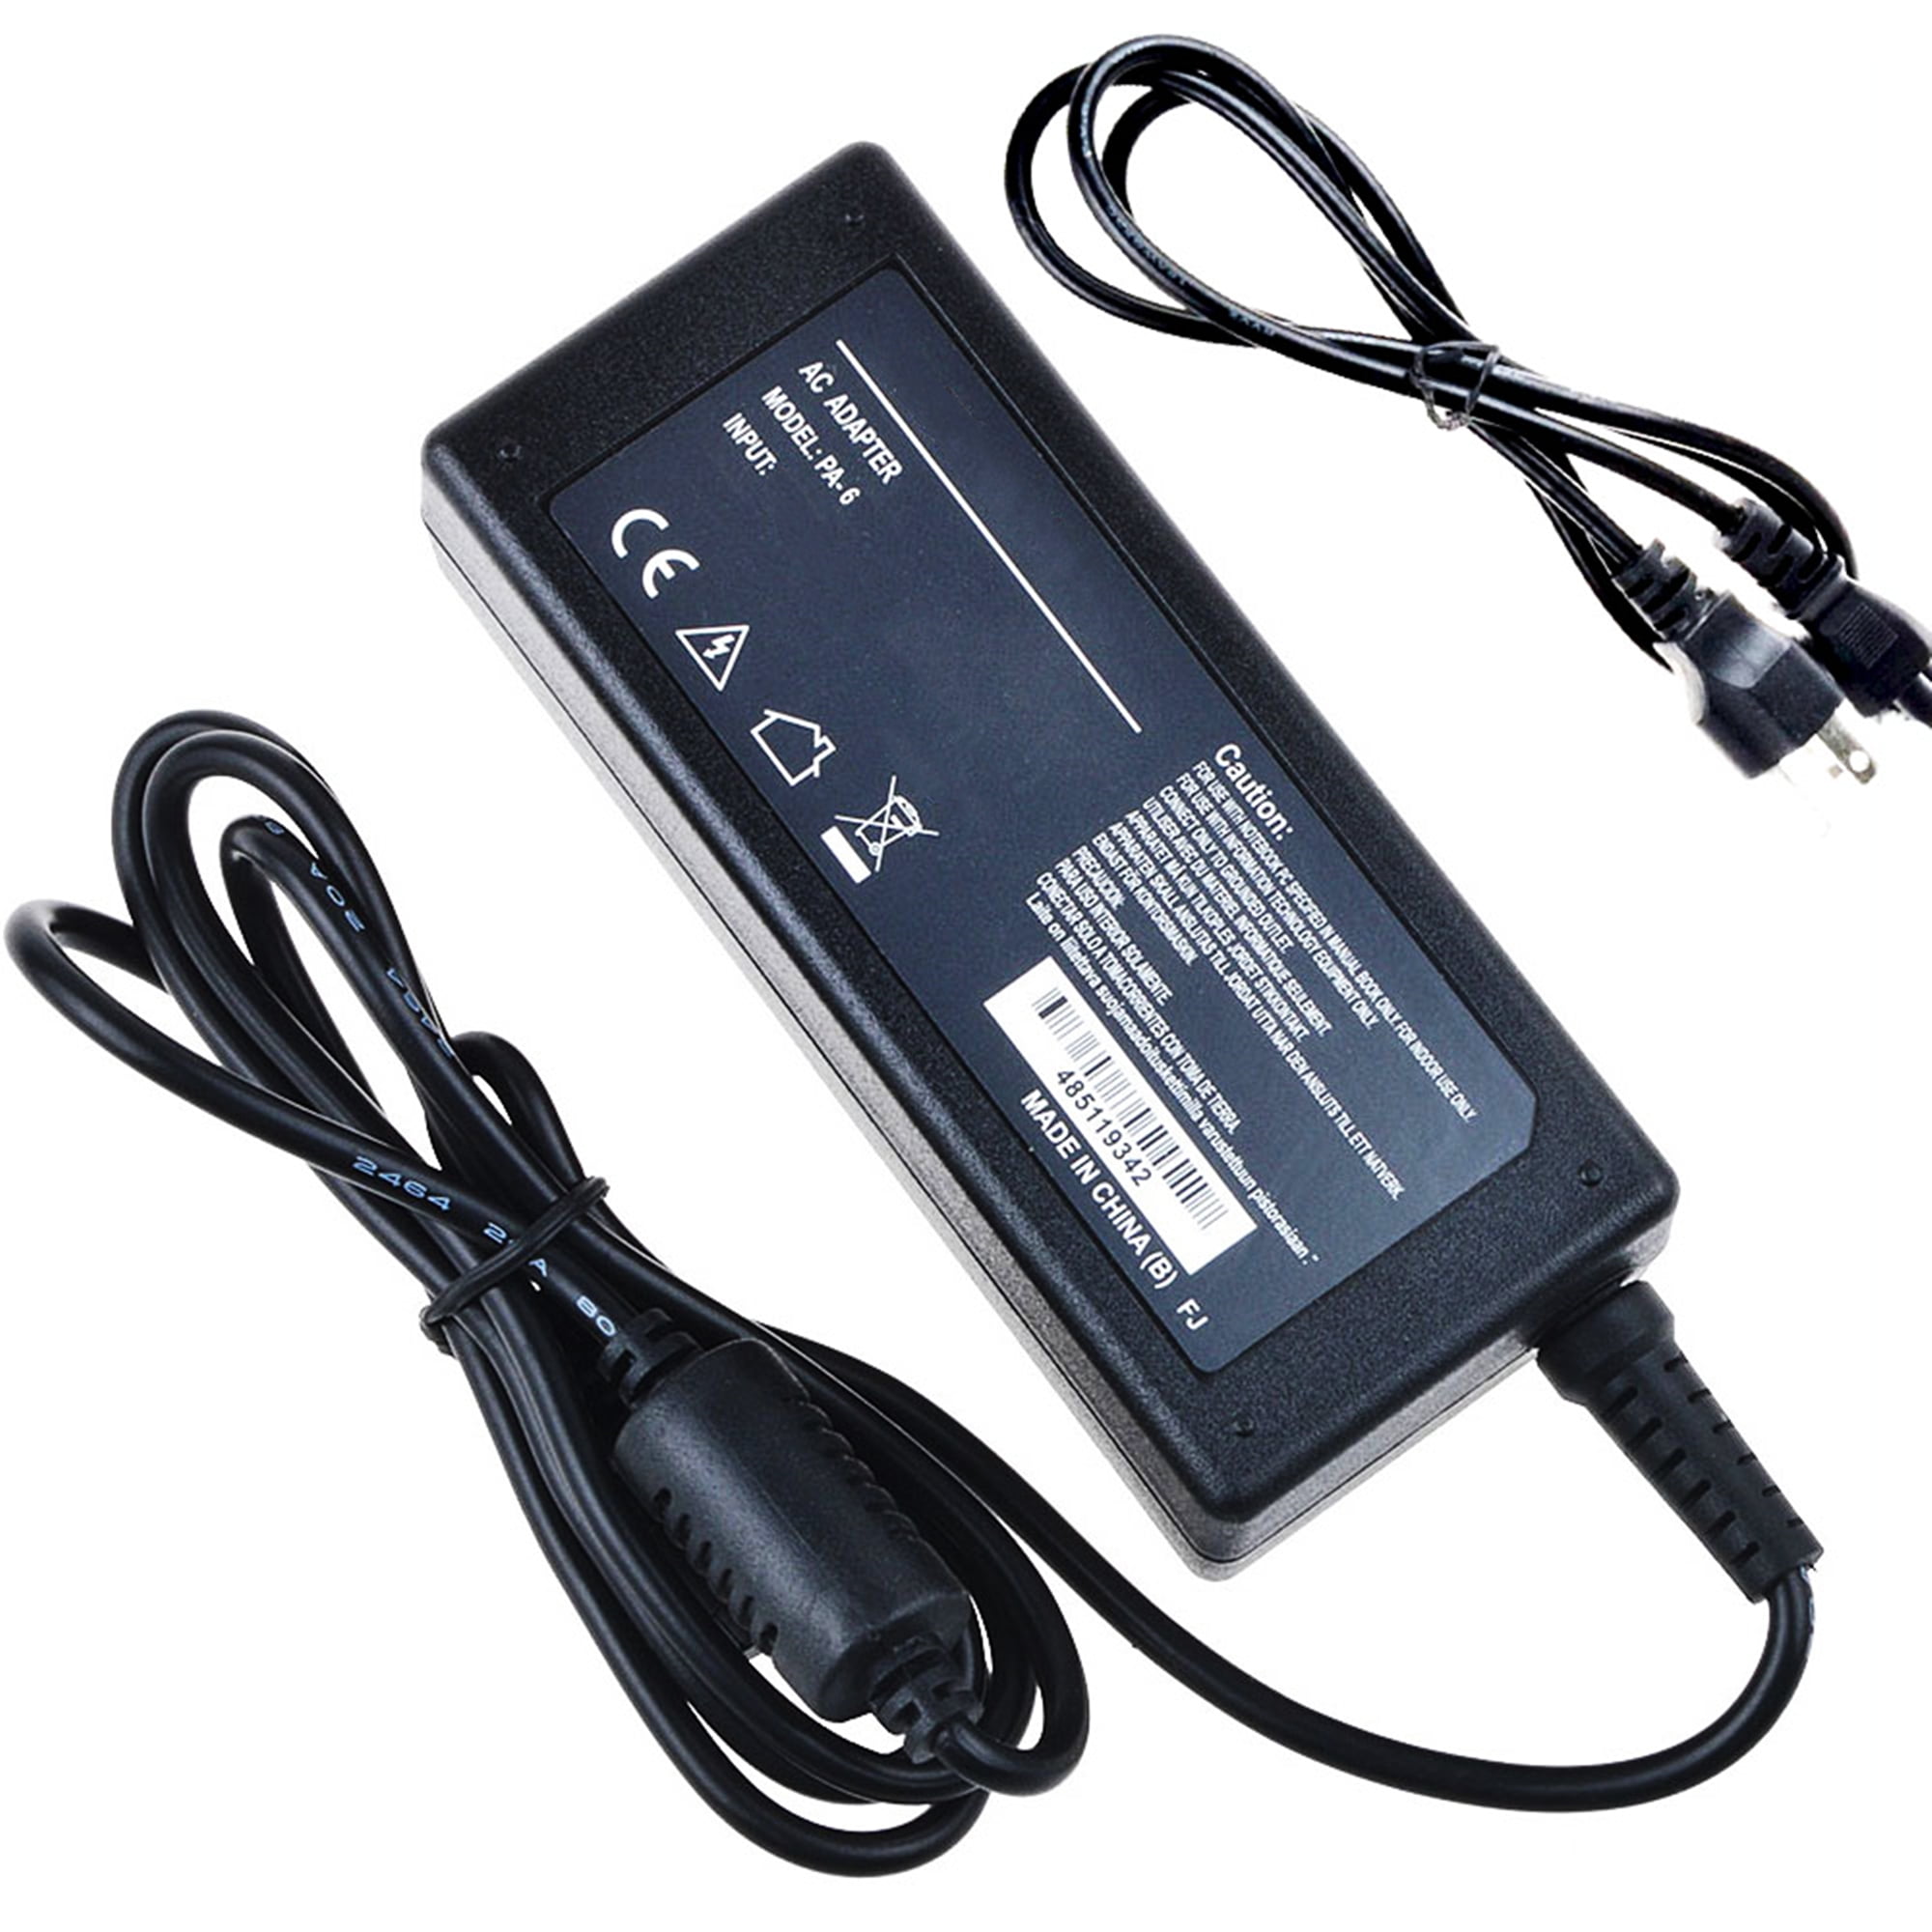 IT12V-1203000 Smartparts DI50IW Power Supply Cord Cable AC DC Adapter for Model 